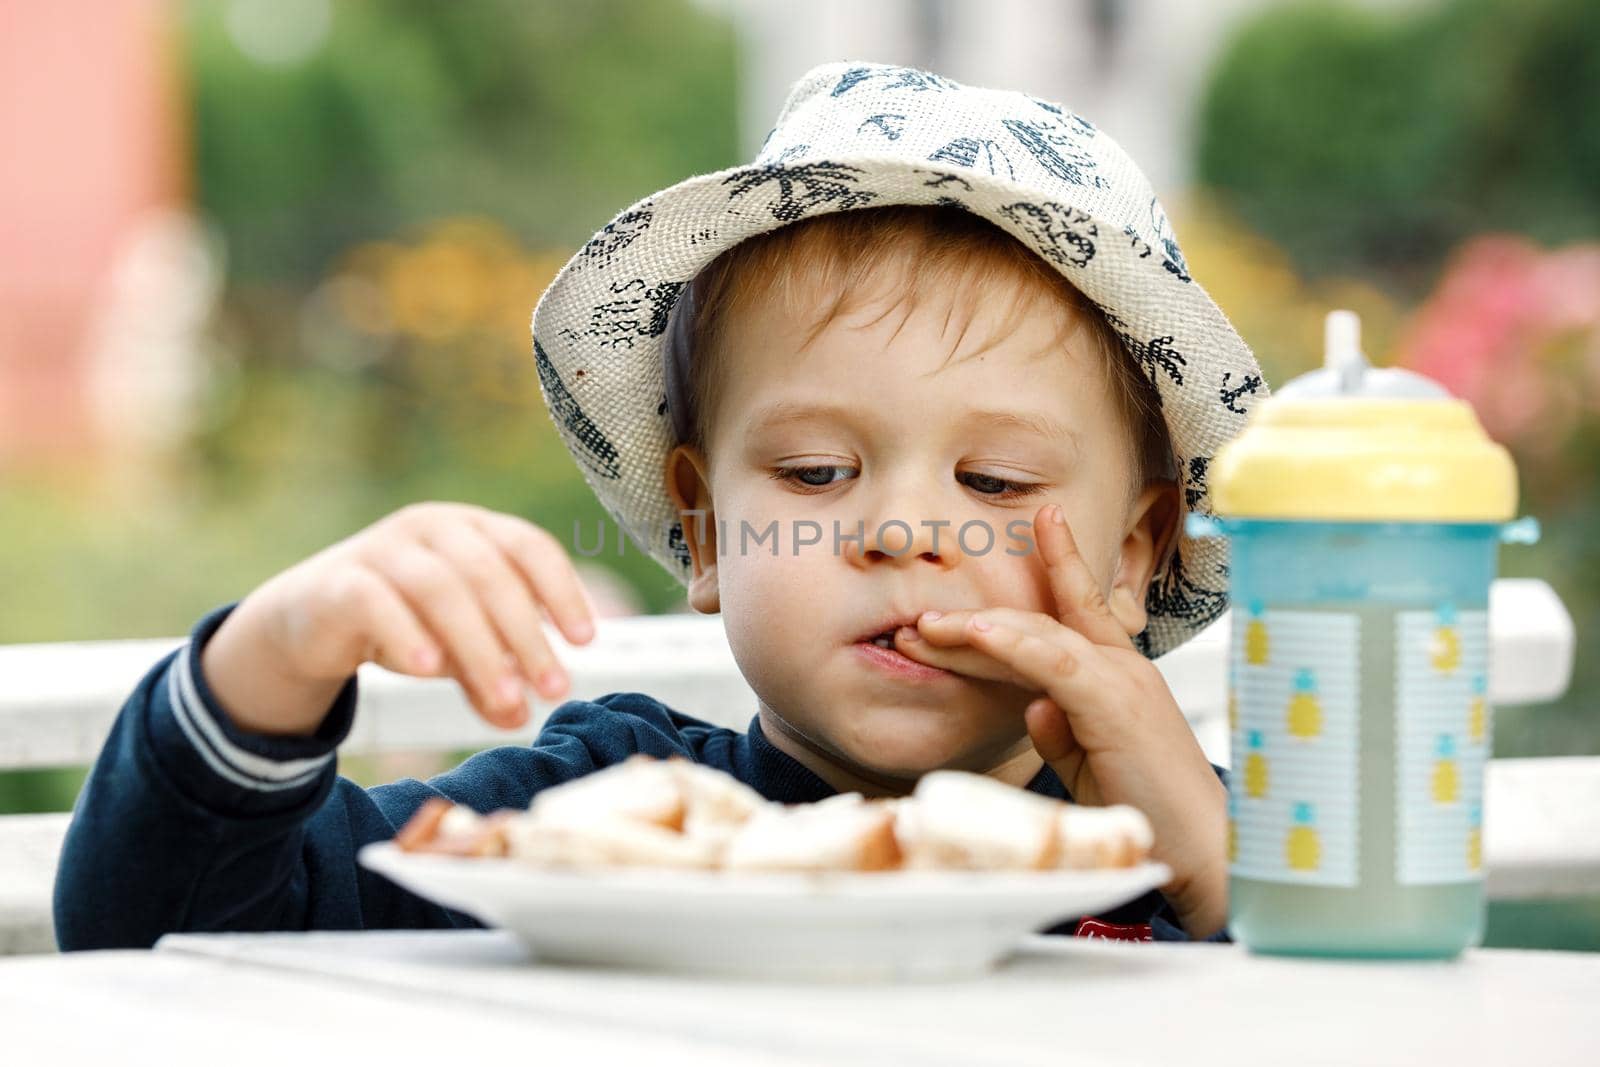 A little boy in a white hat tastes bread with cheese while licking his fingers. A plastic cup with pineapple juice on the table.